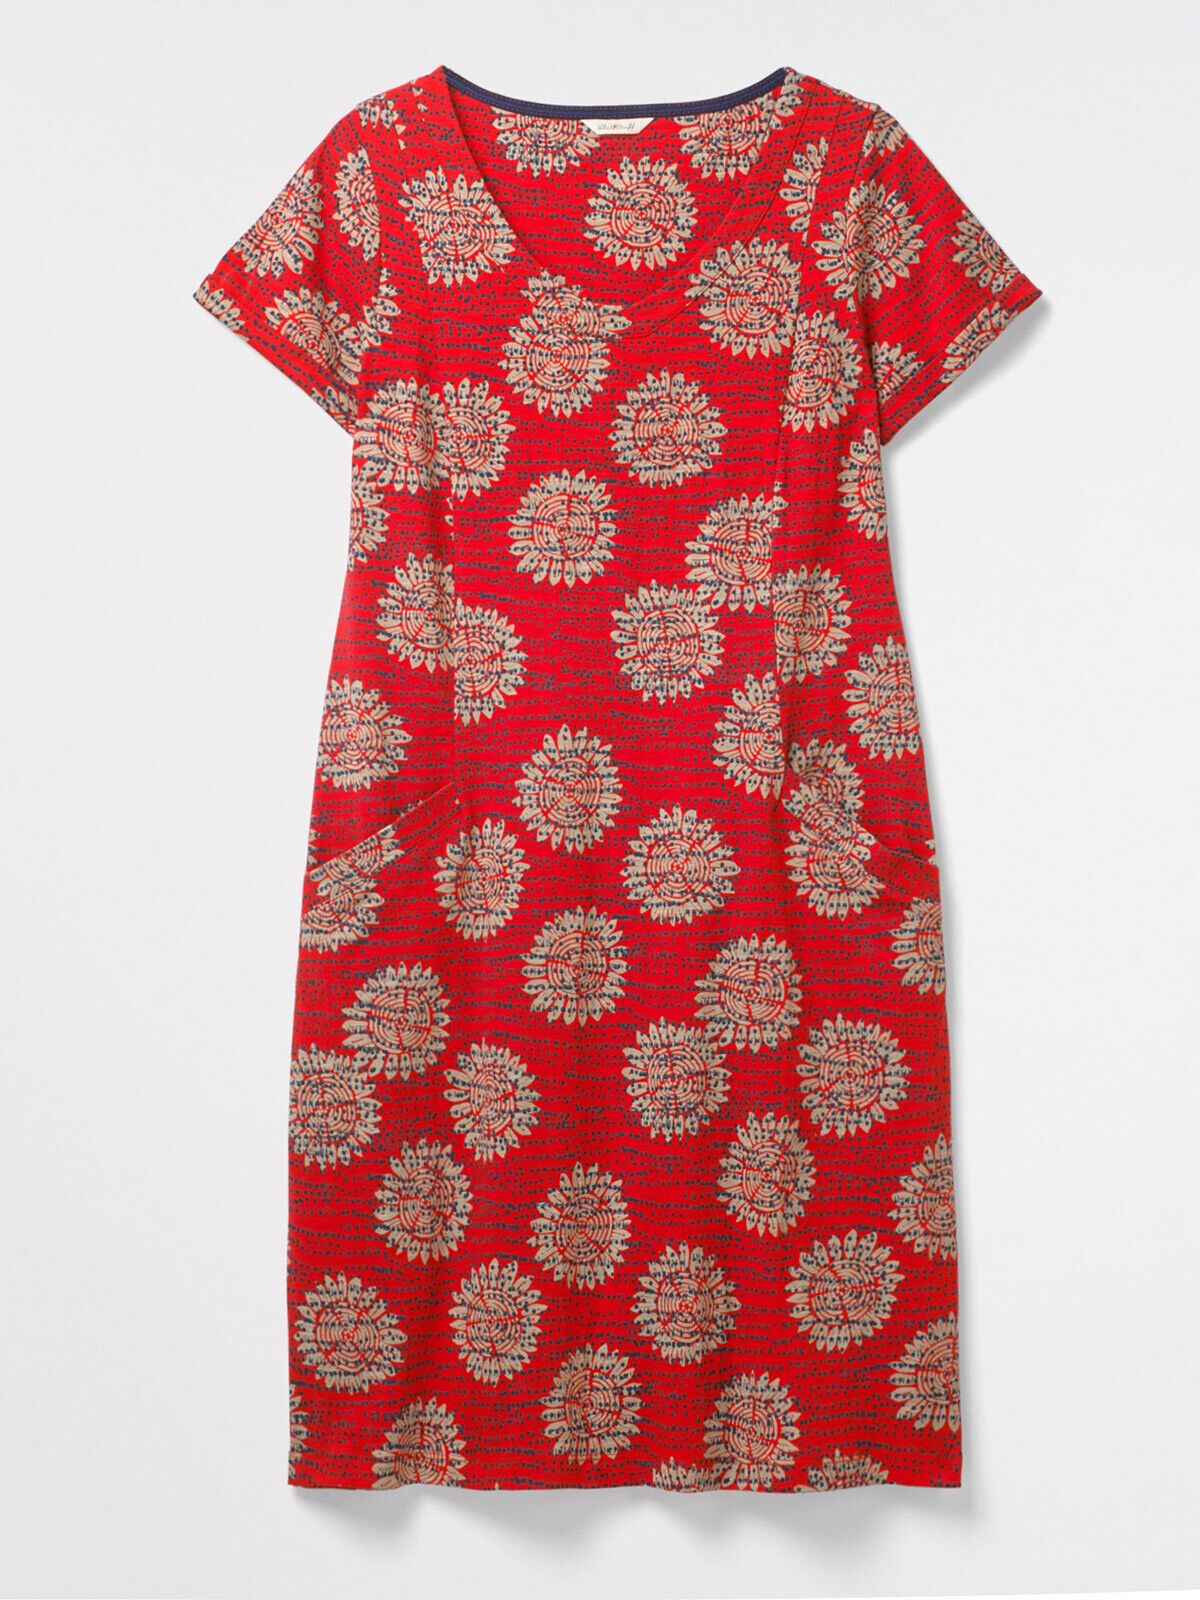 EX WHITE STUFF Coral Selina Fairtrade Dress in Size 8 RRP £55